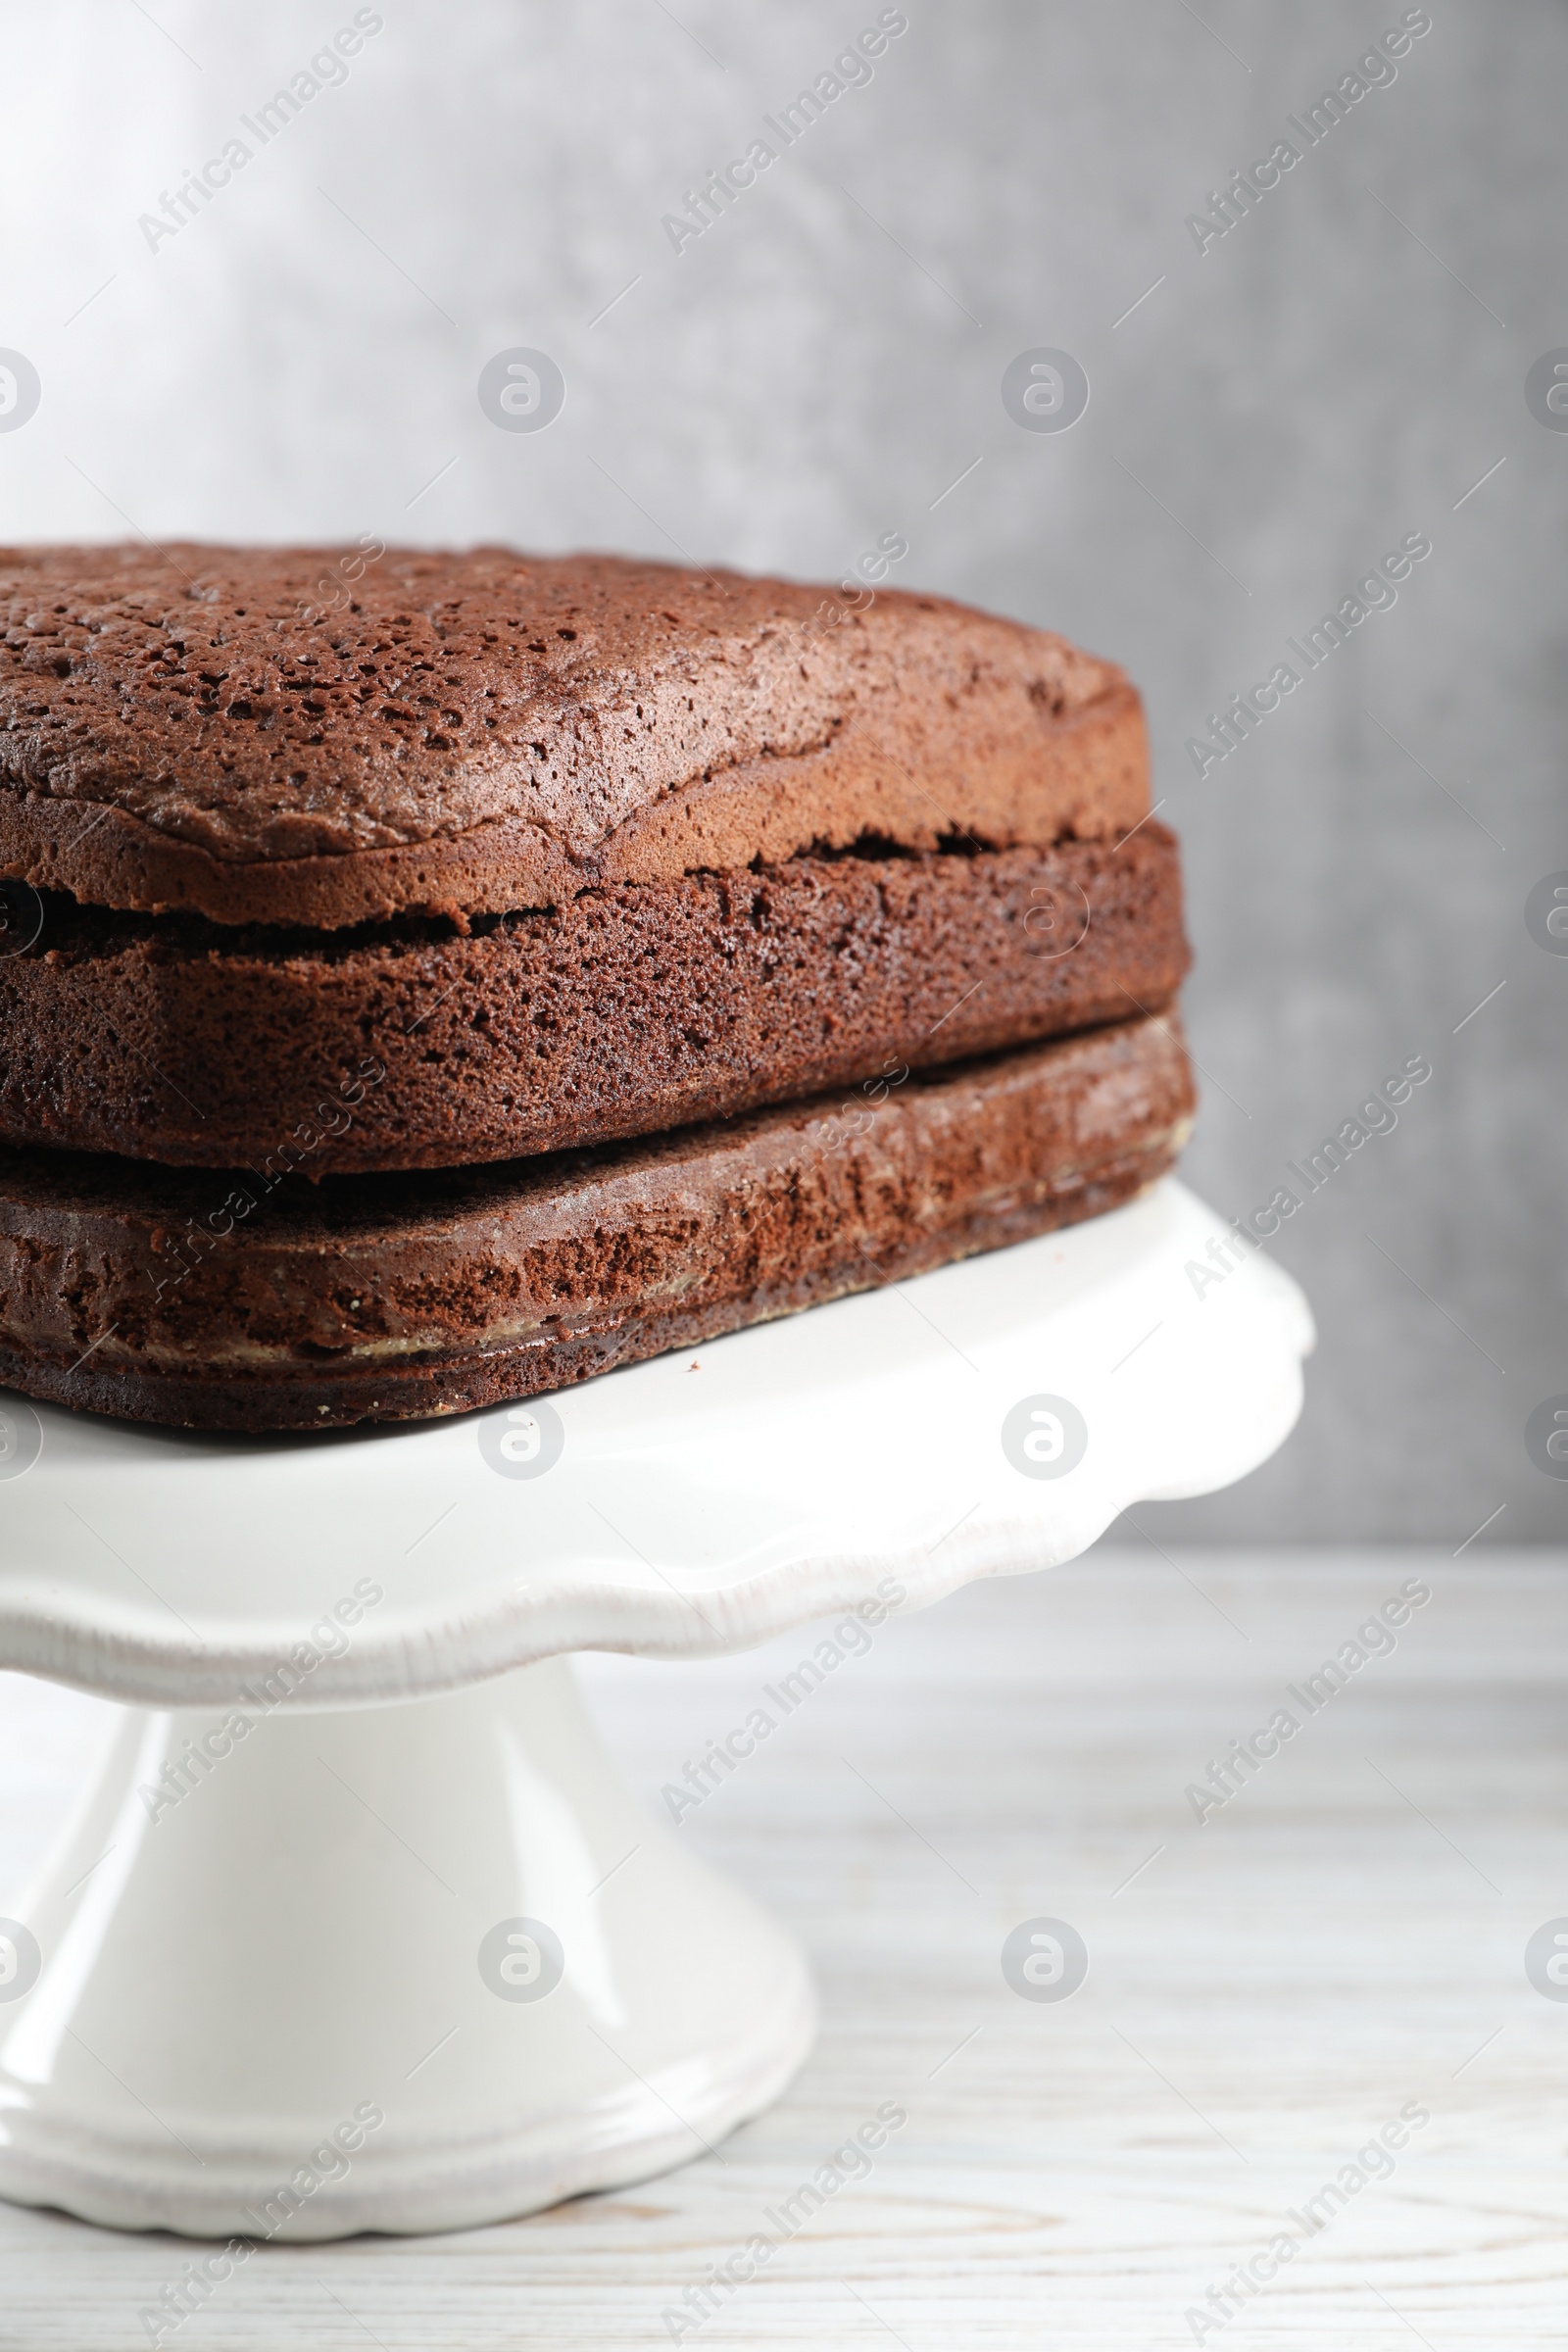 Photo of Stand with layers of homemade chocolate sponge cake on white wooden table